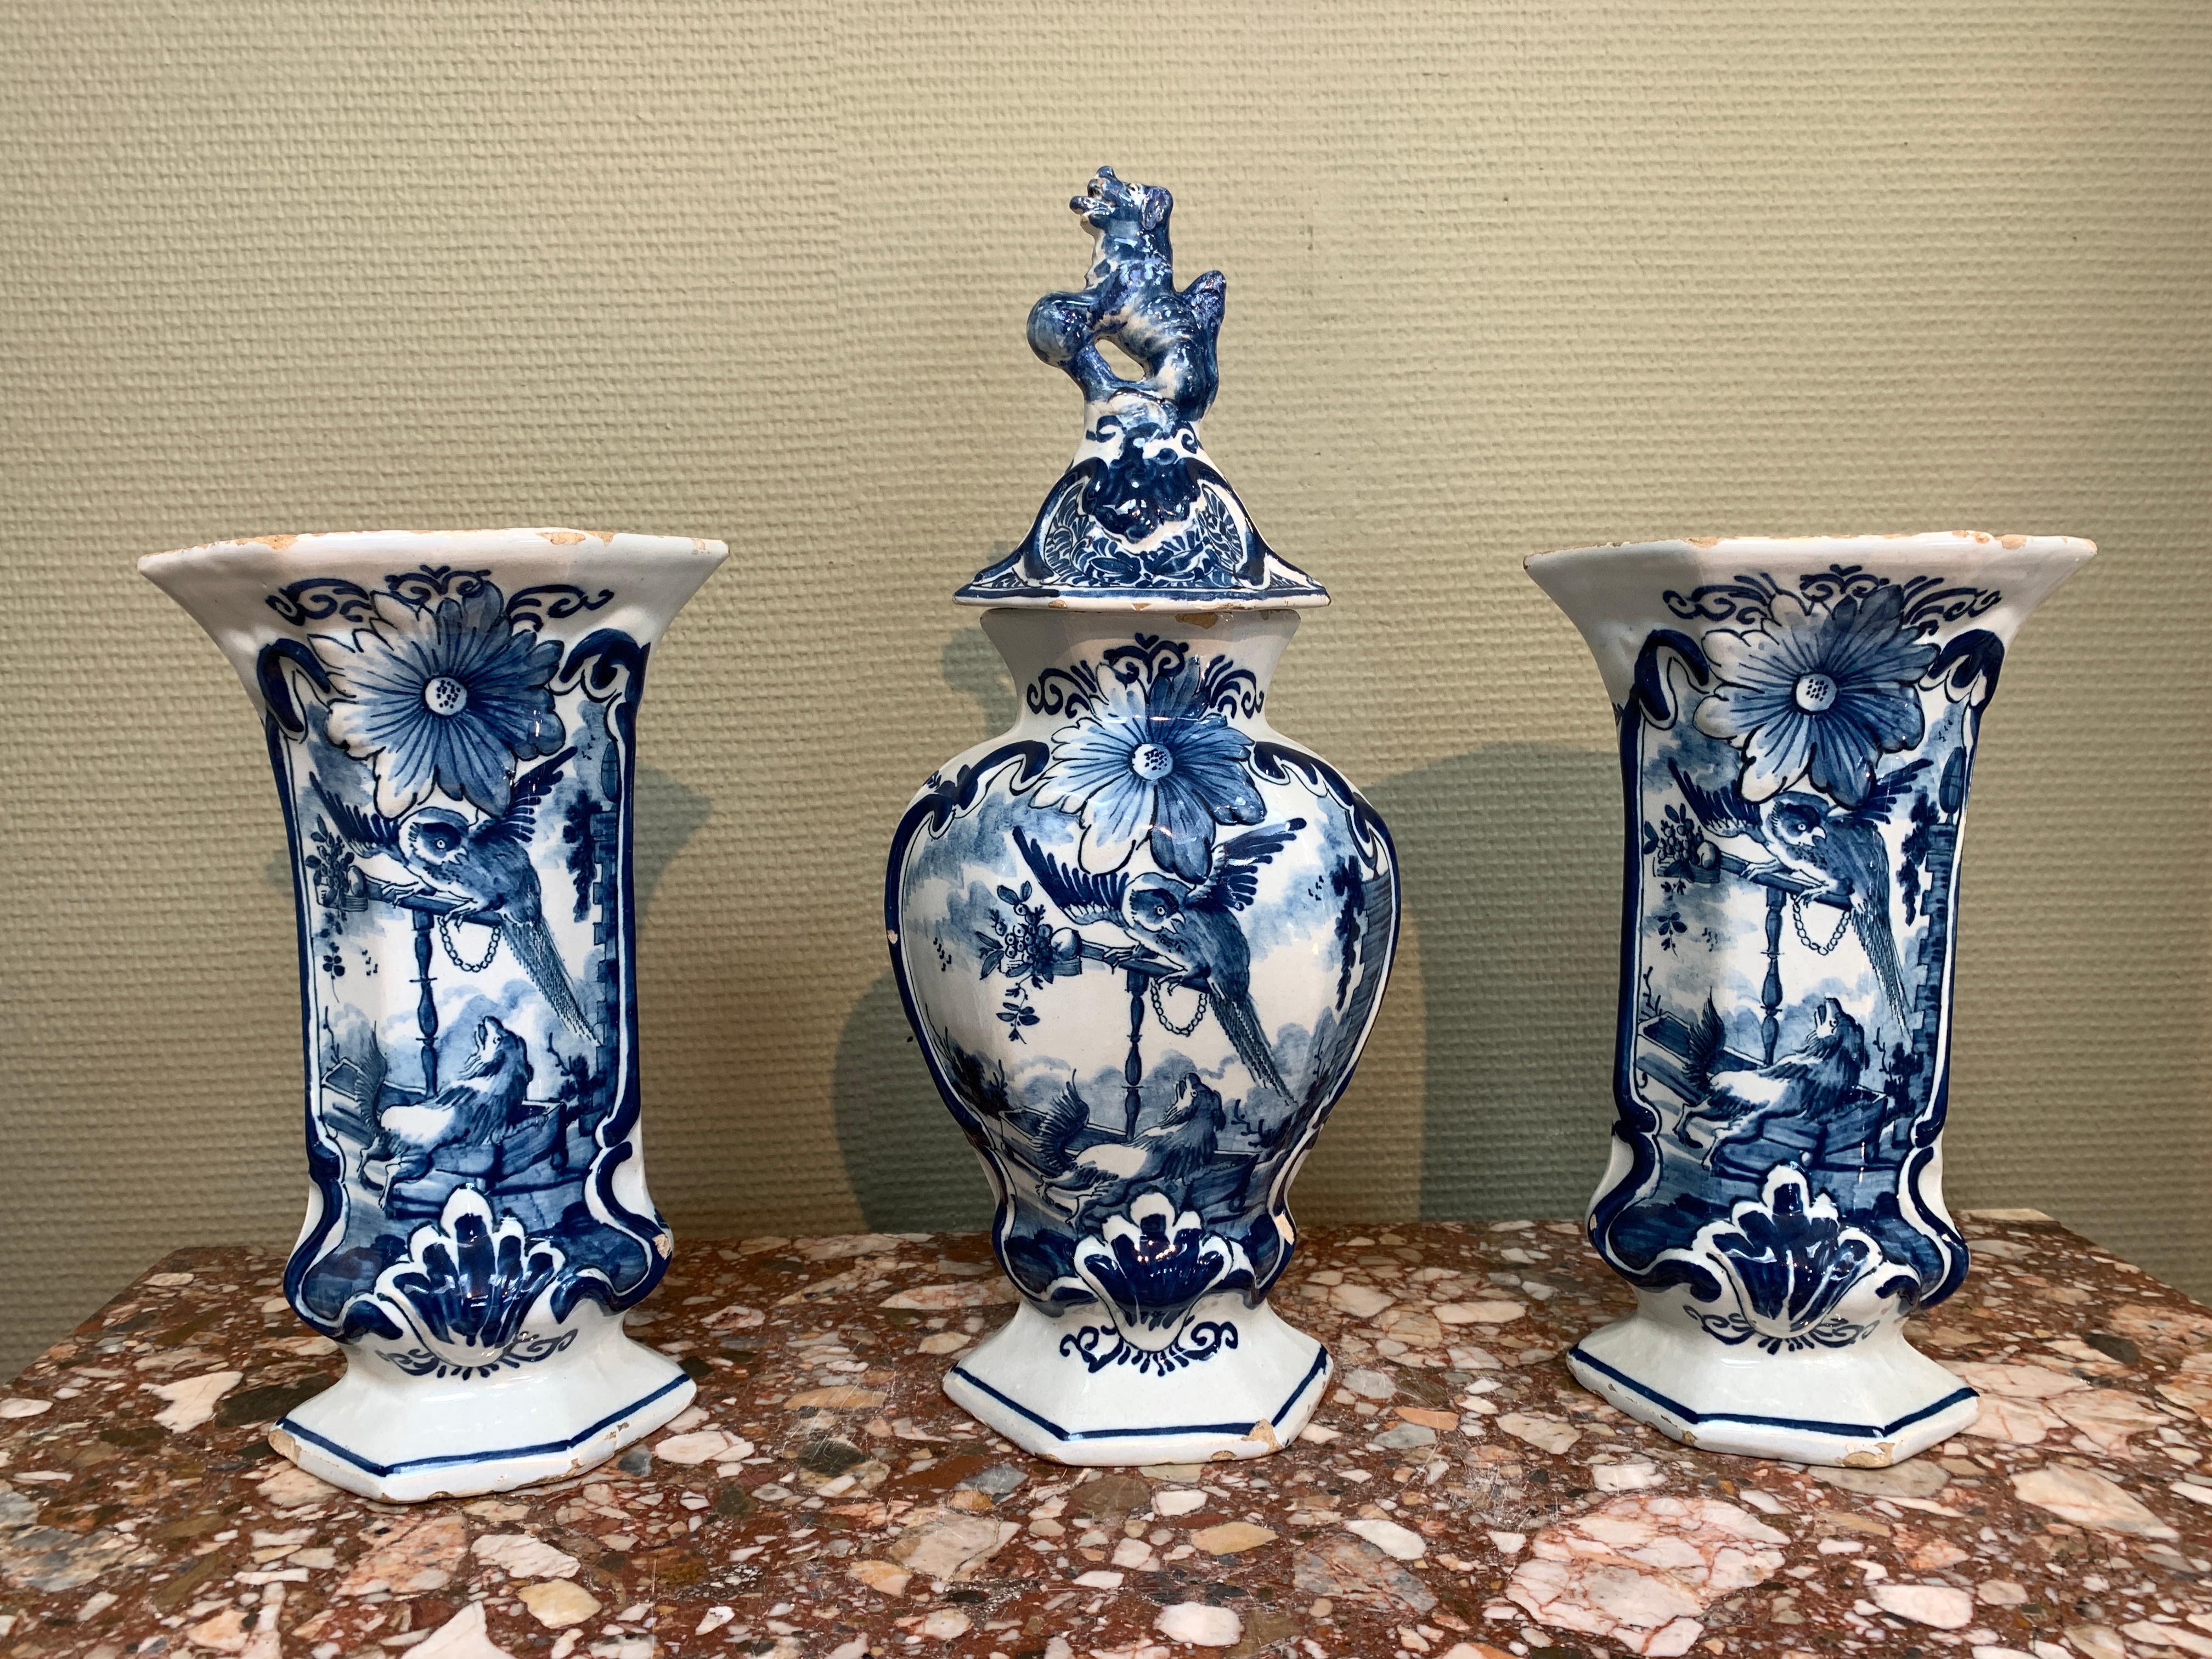 A Dutch Delft garniture of two side and one middle vase, decorated with a dog and parrot.

Origin: Delft, The Netherlands
Date: 1763 - 1806
Workshop: De Porceleyne Clauw
Owner: Lambertus Sanderus

A wonderful Dutch Delft Garniture with a decoration